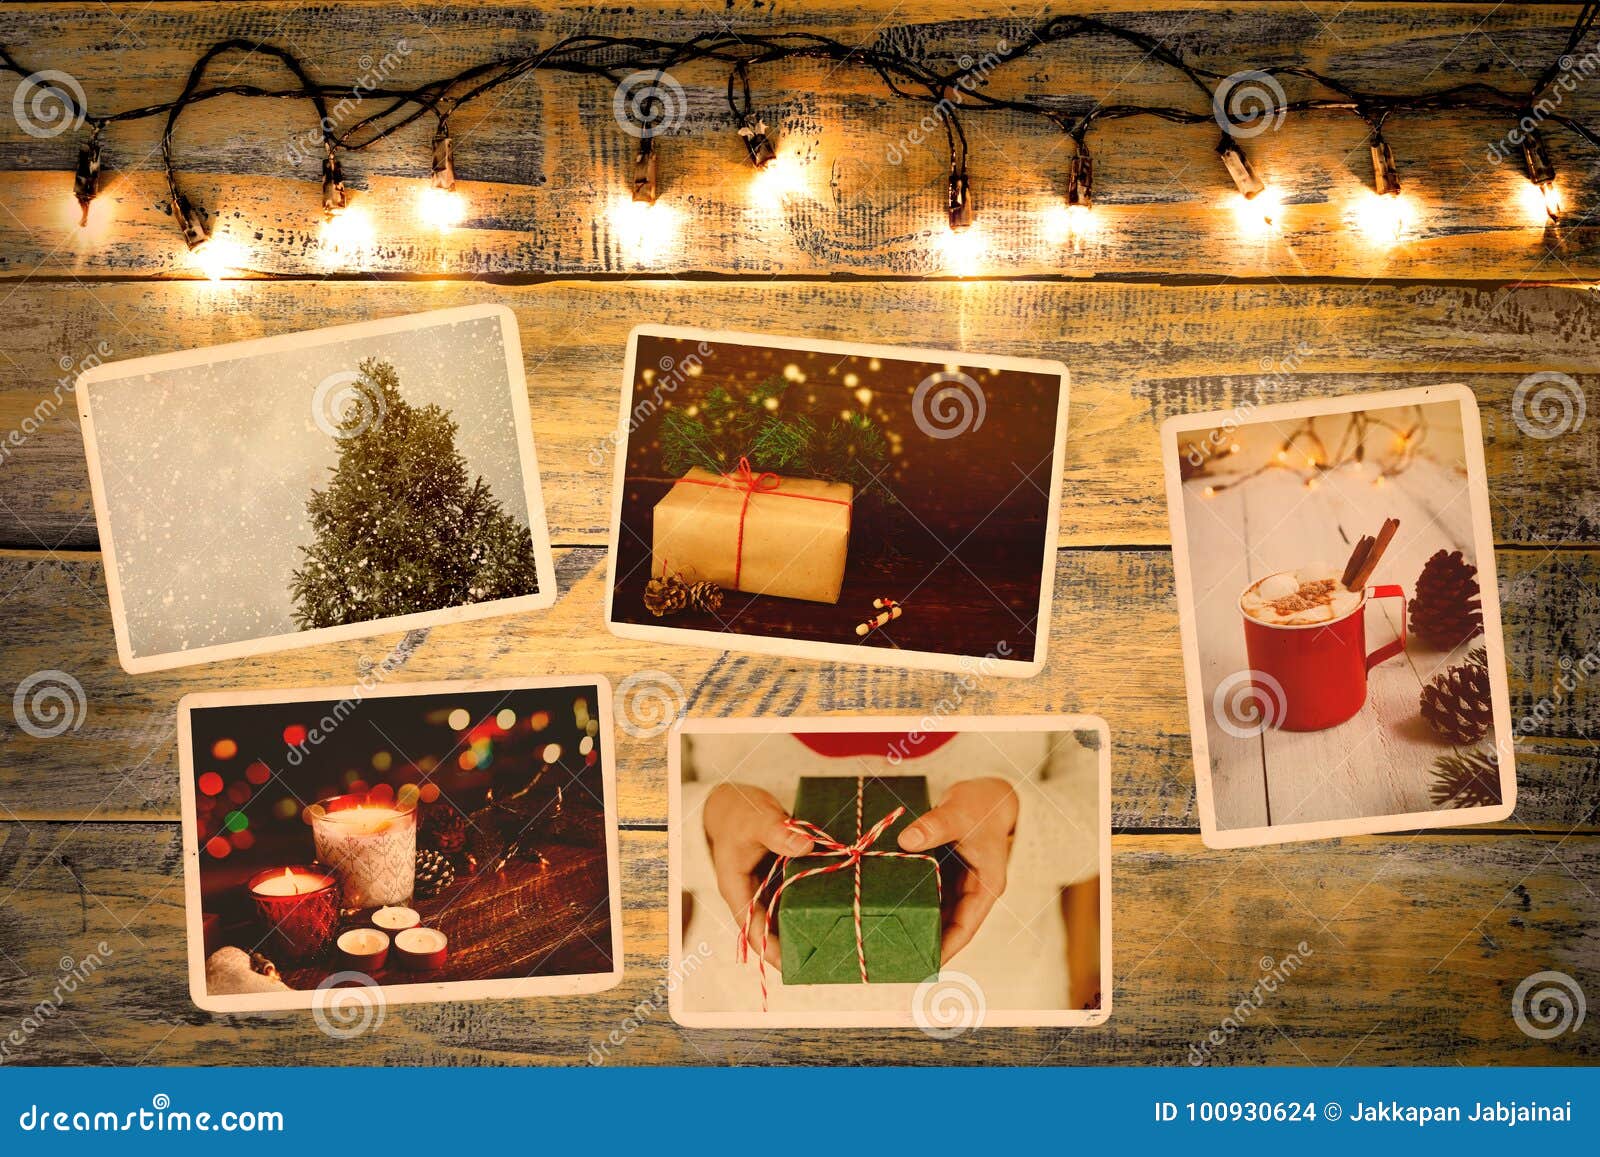 photo album in remembrance and nostalgia in christmas winter season on wood table.